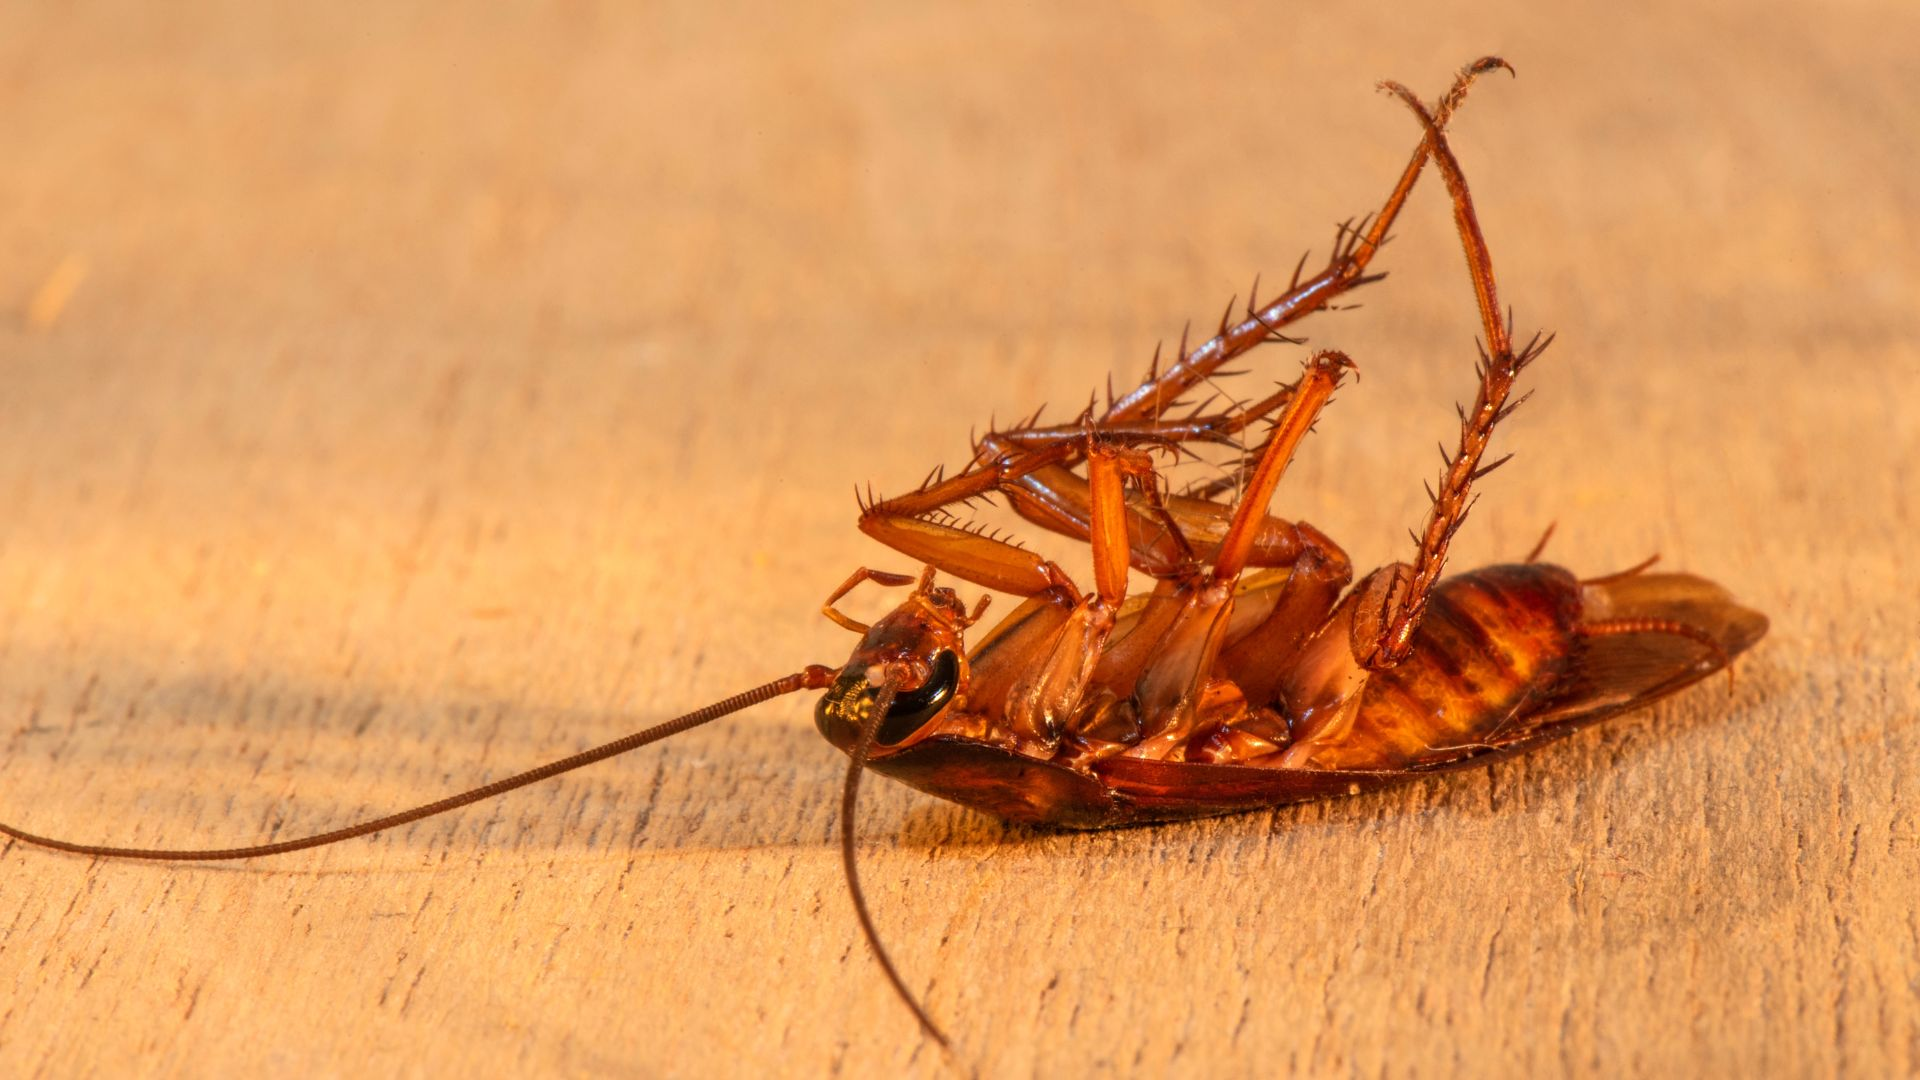 An image of a dead American cockroach on a wooden surface.